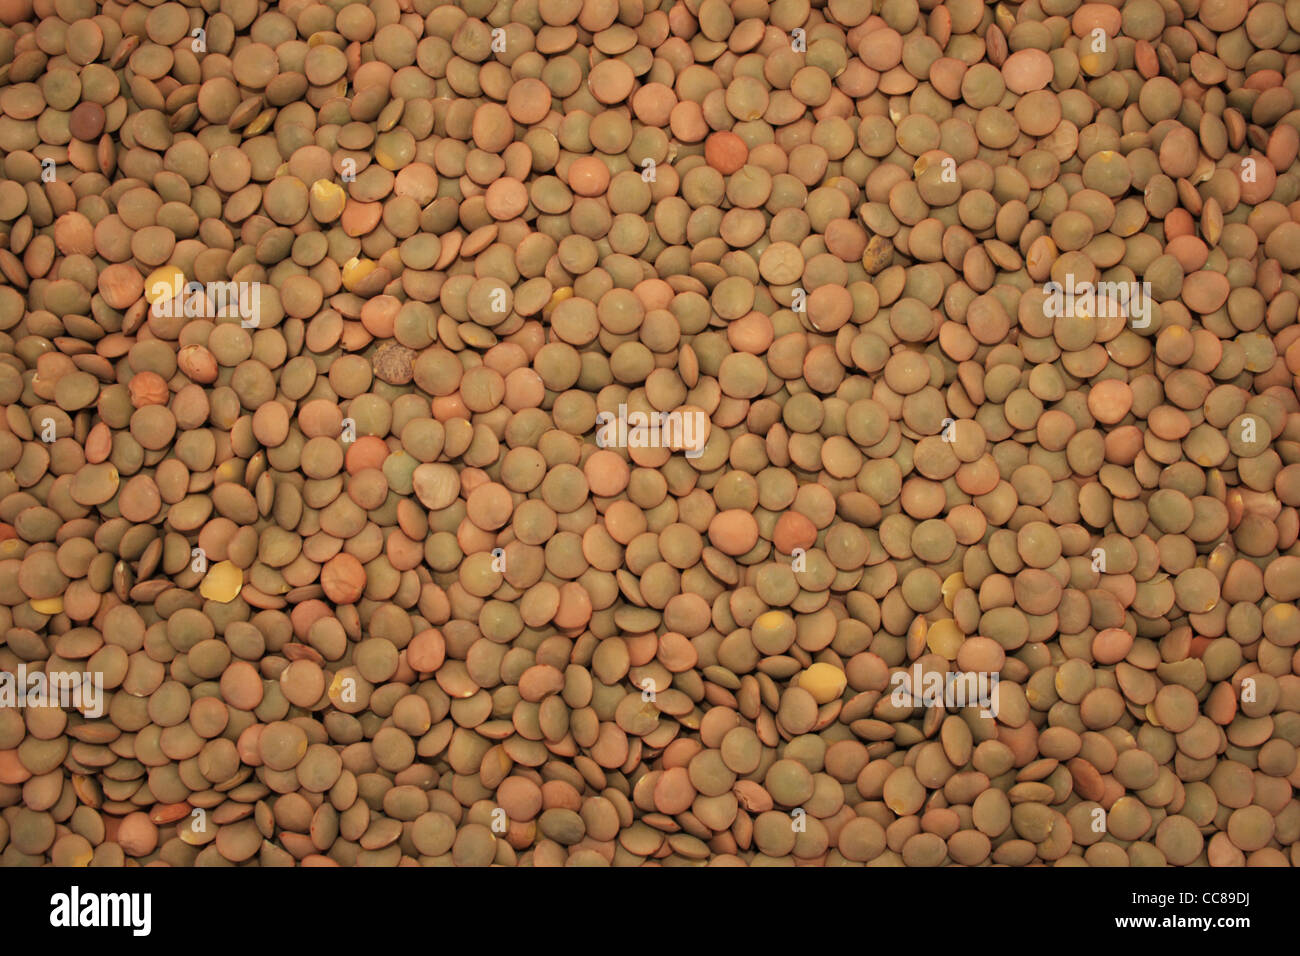 dry lentil, pulse, or daal background Stock Photo